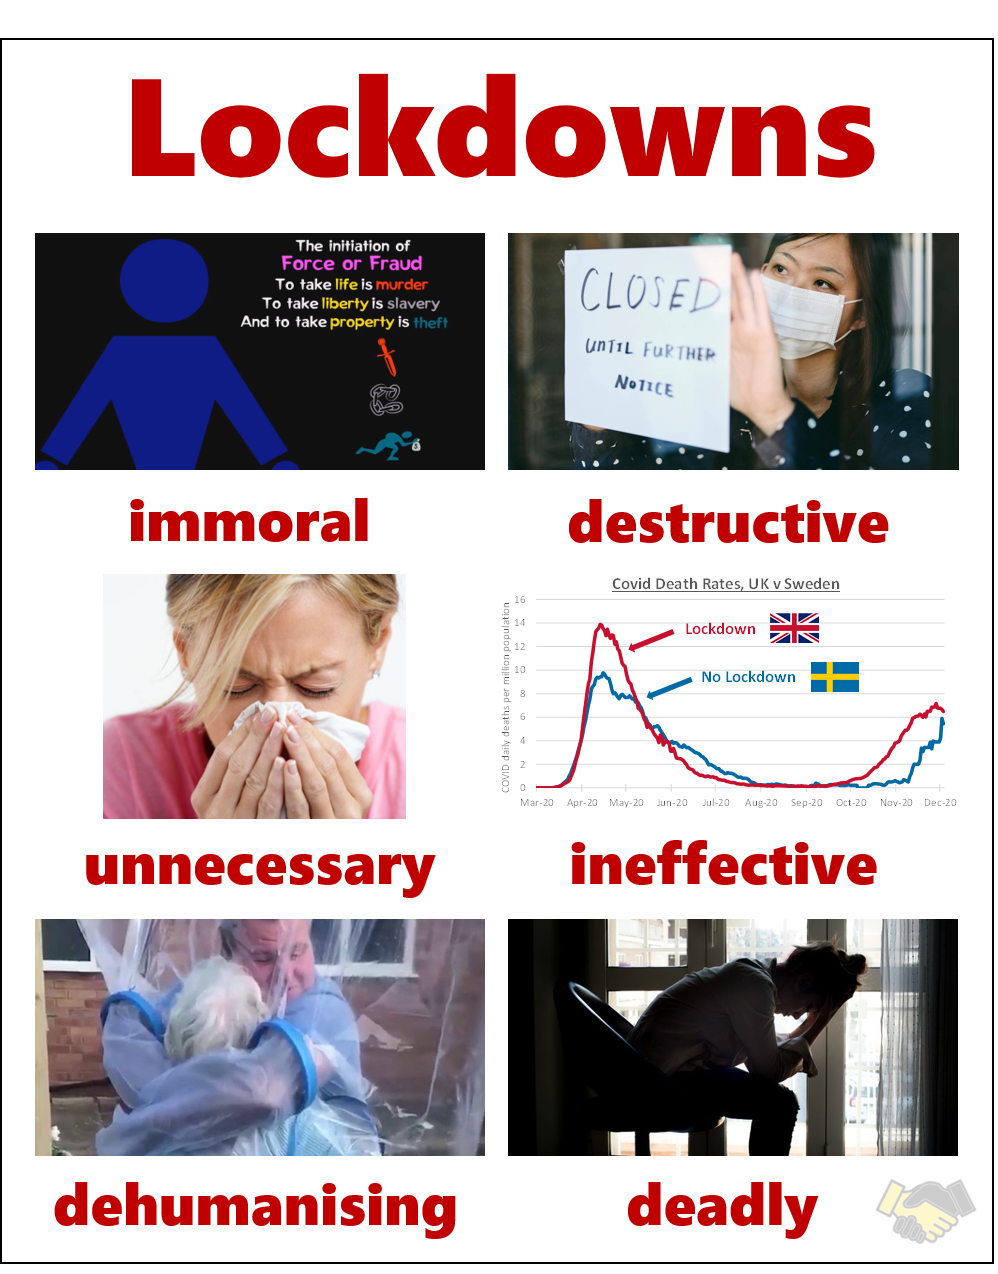 Lockdowns Kill More People Than They Save